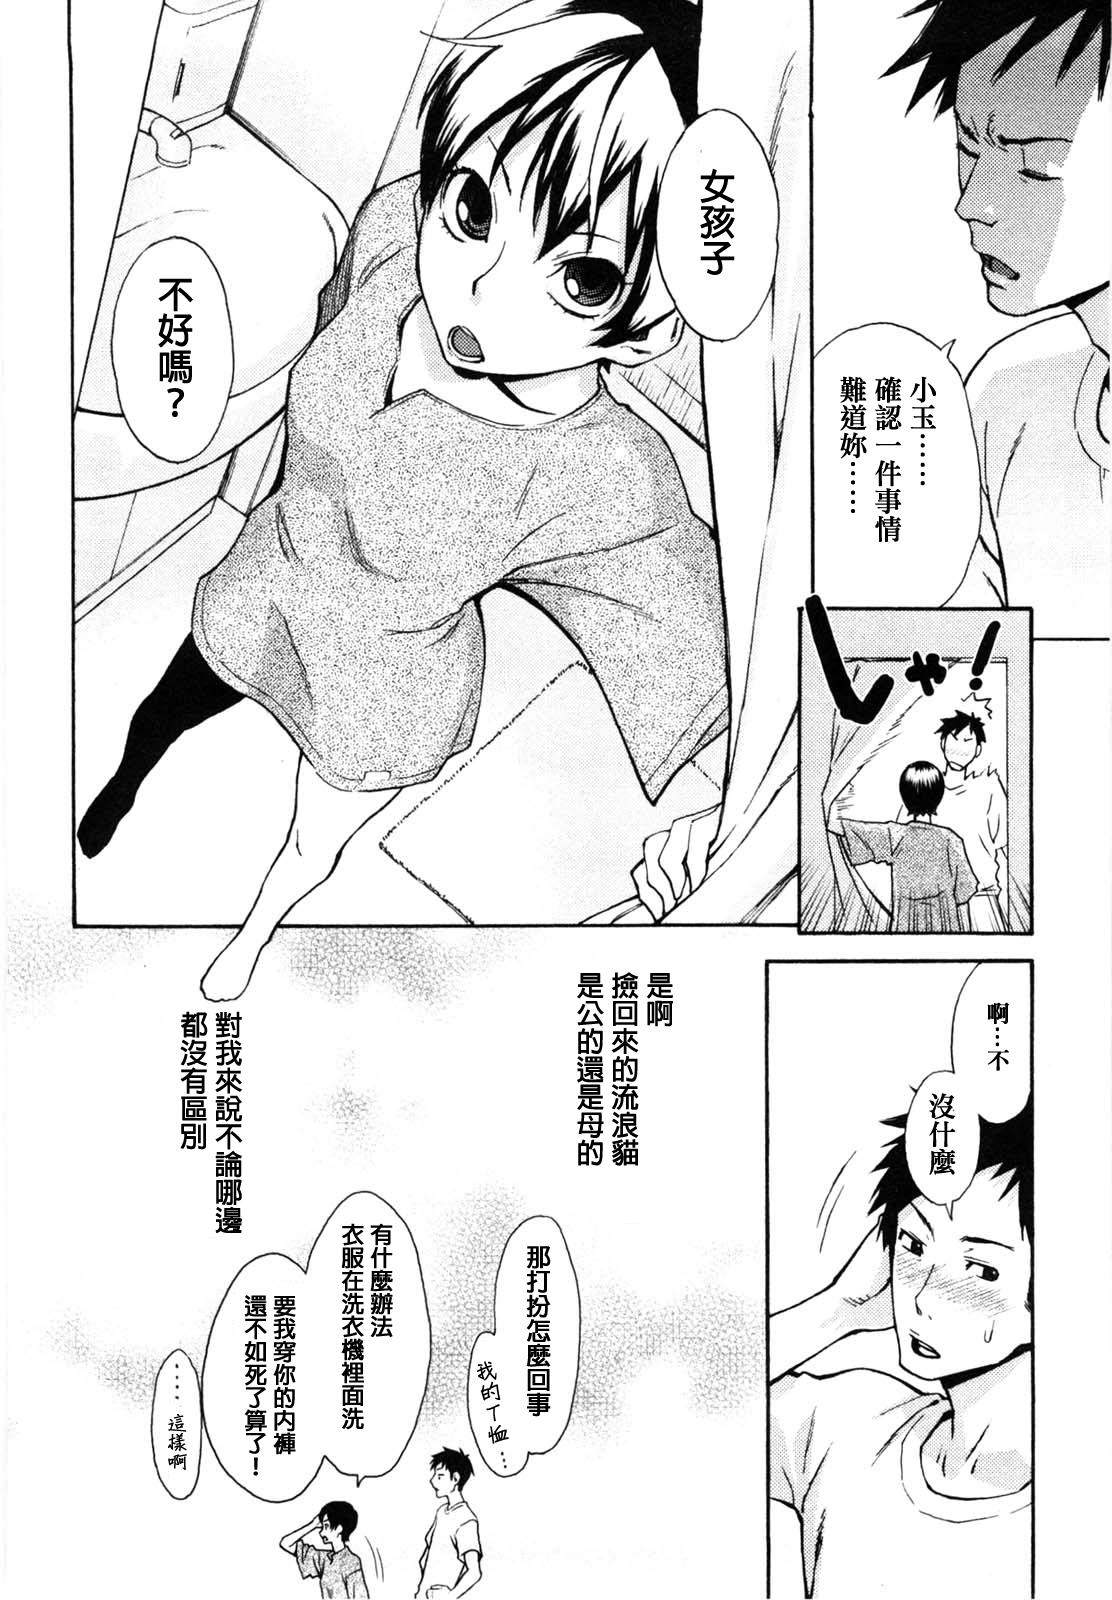  Sanchoume no Tama | Tama from Third Street Ch. 1 Squirt - Page 9